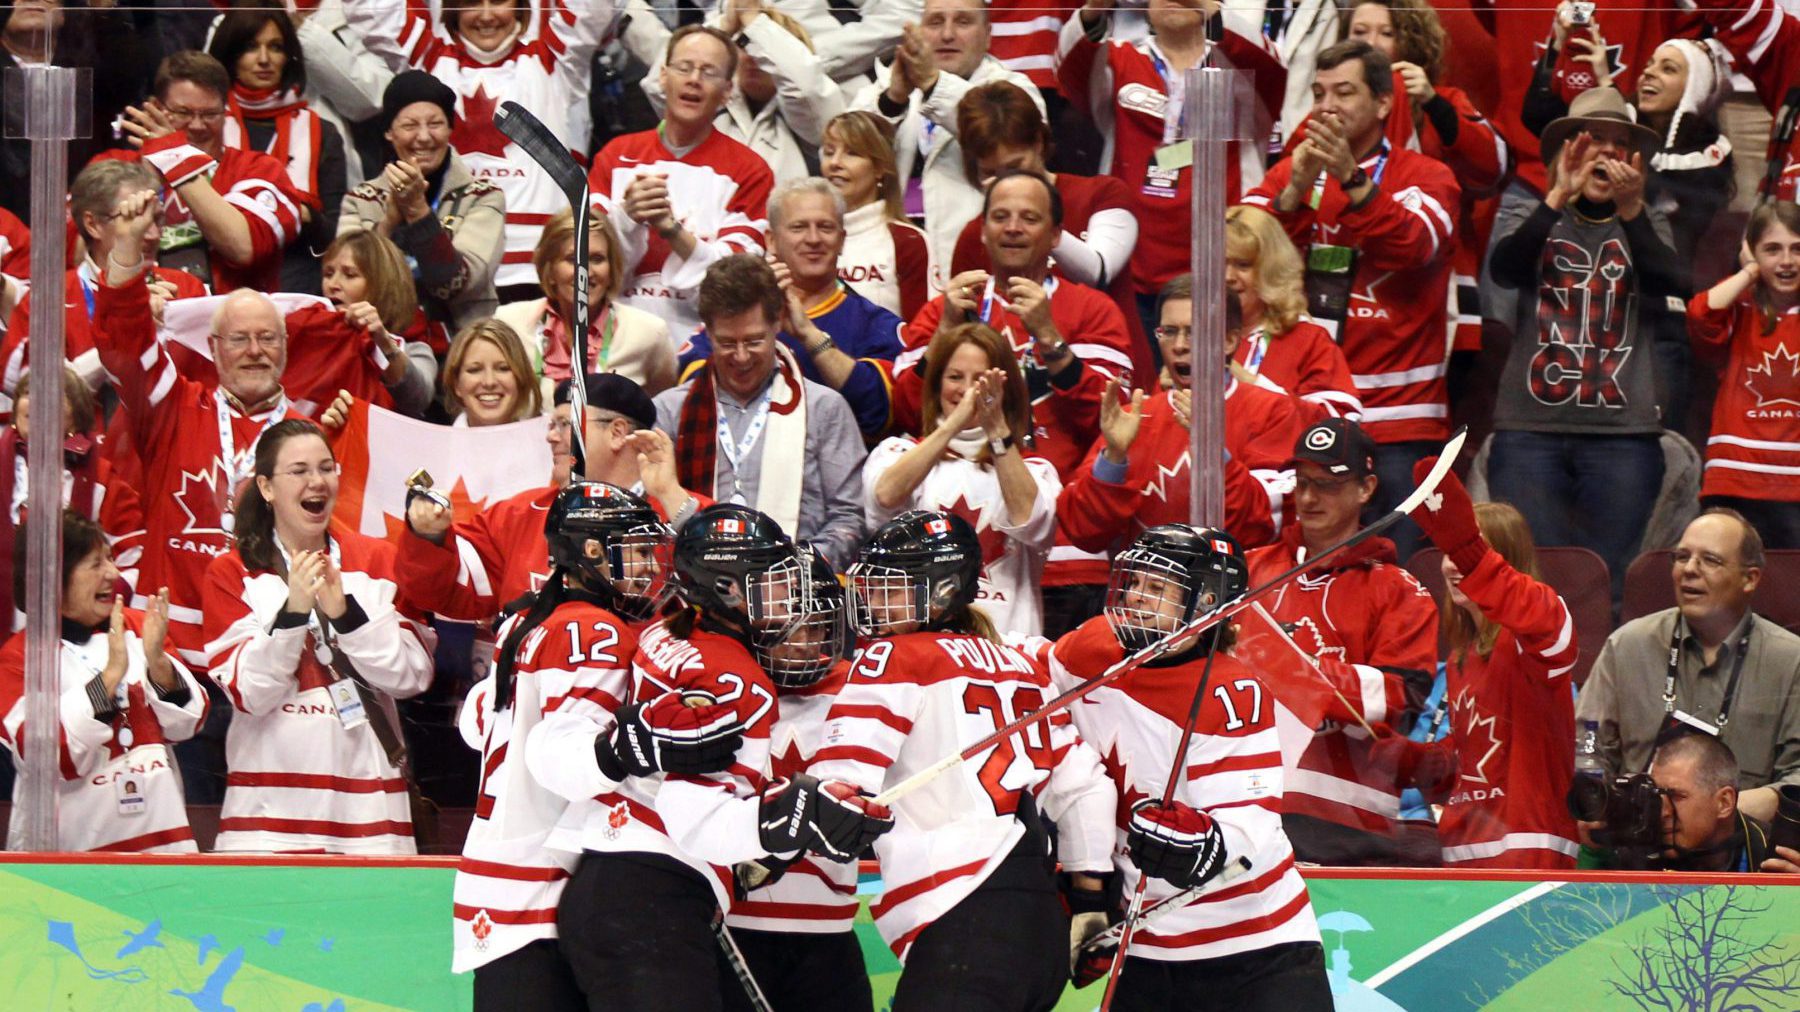 Vancouver Games Top 10 - #3 - Team Canada - Official Olympic Team Website